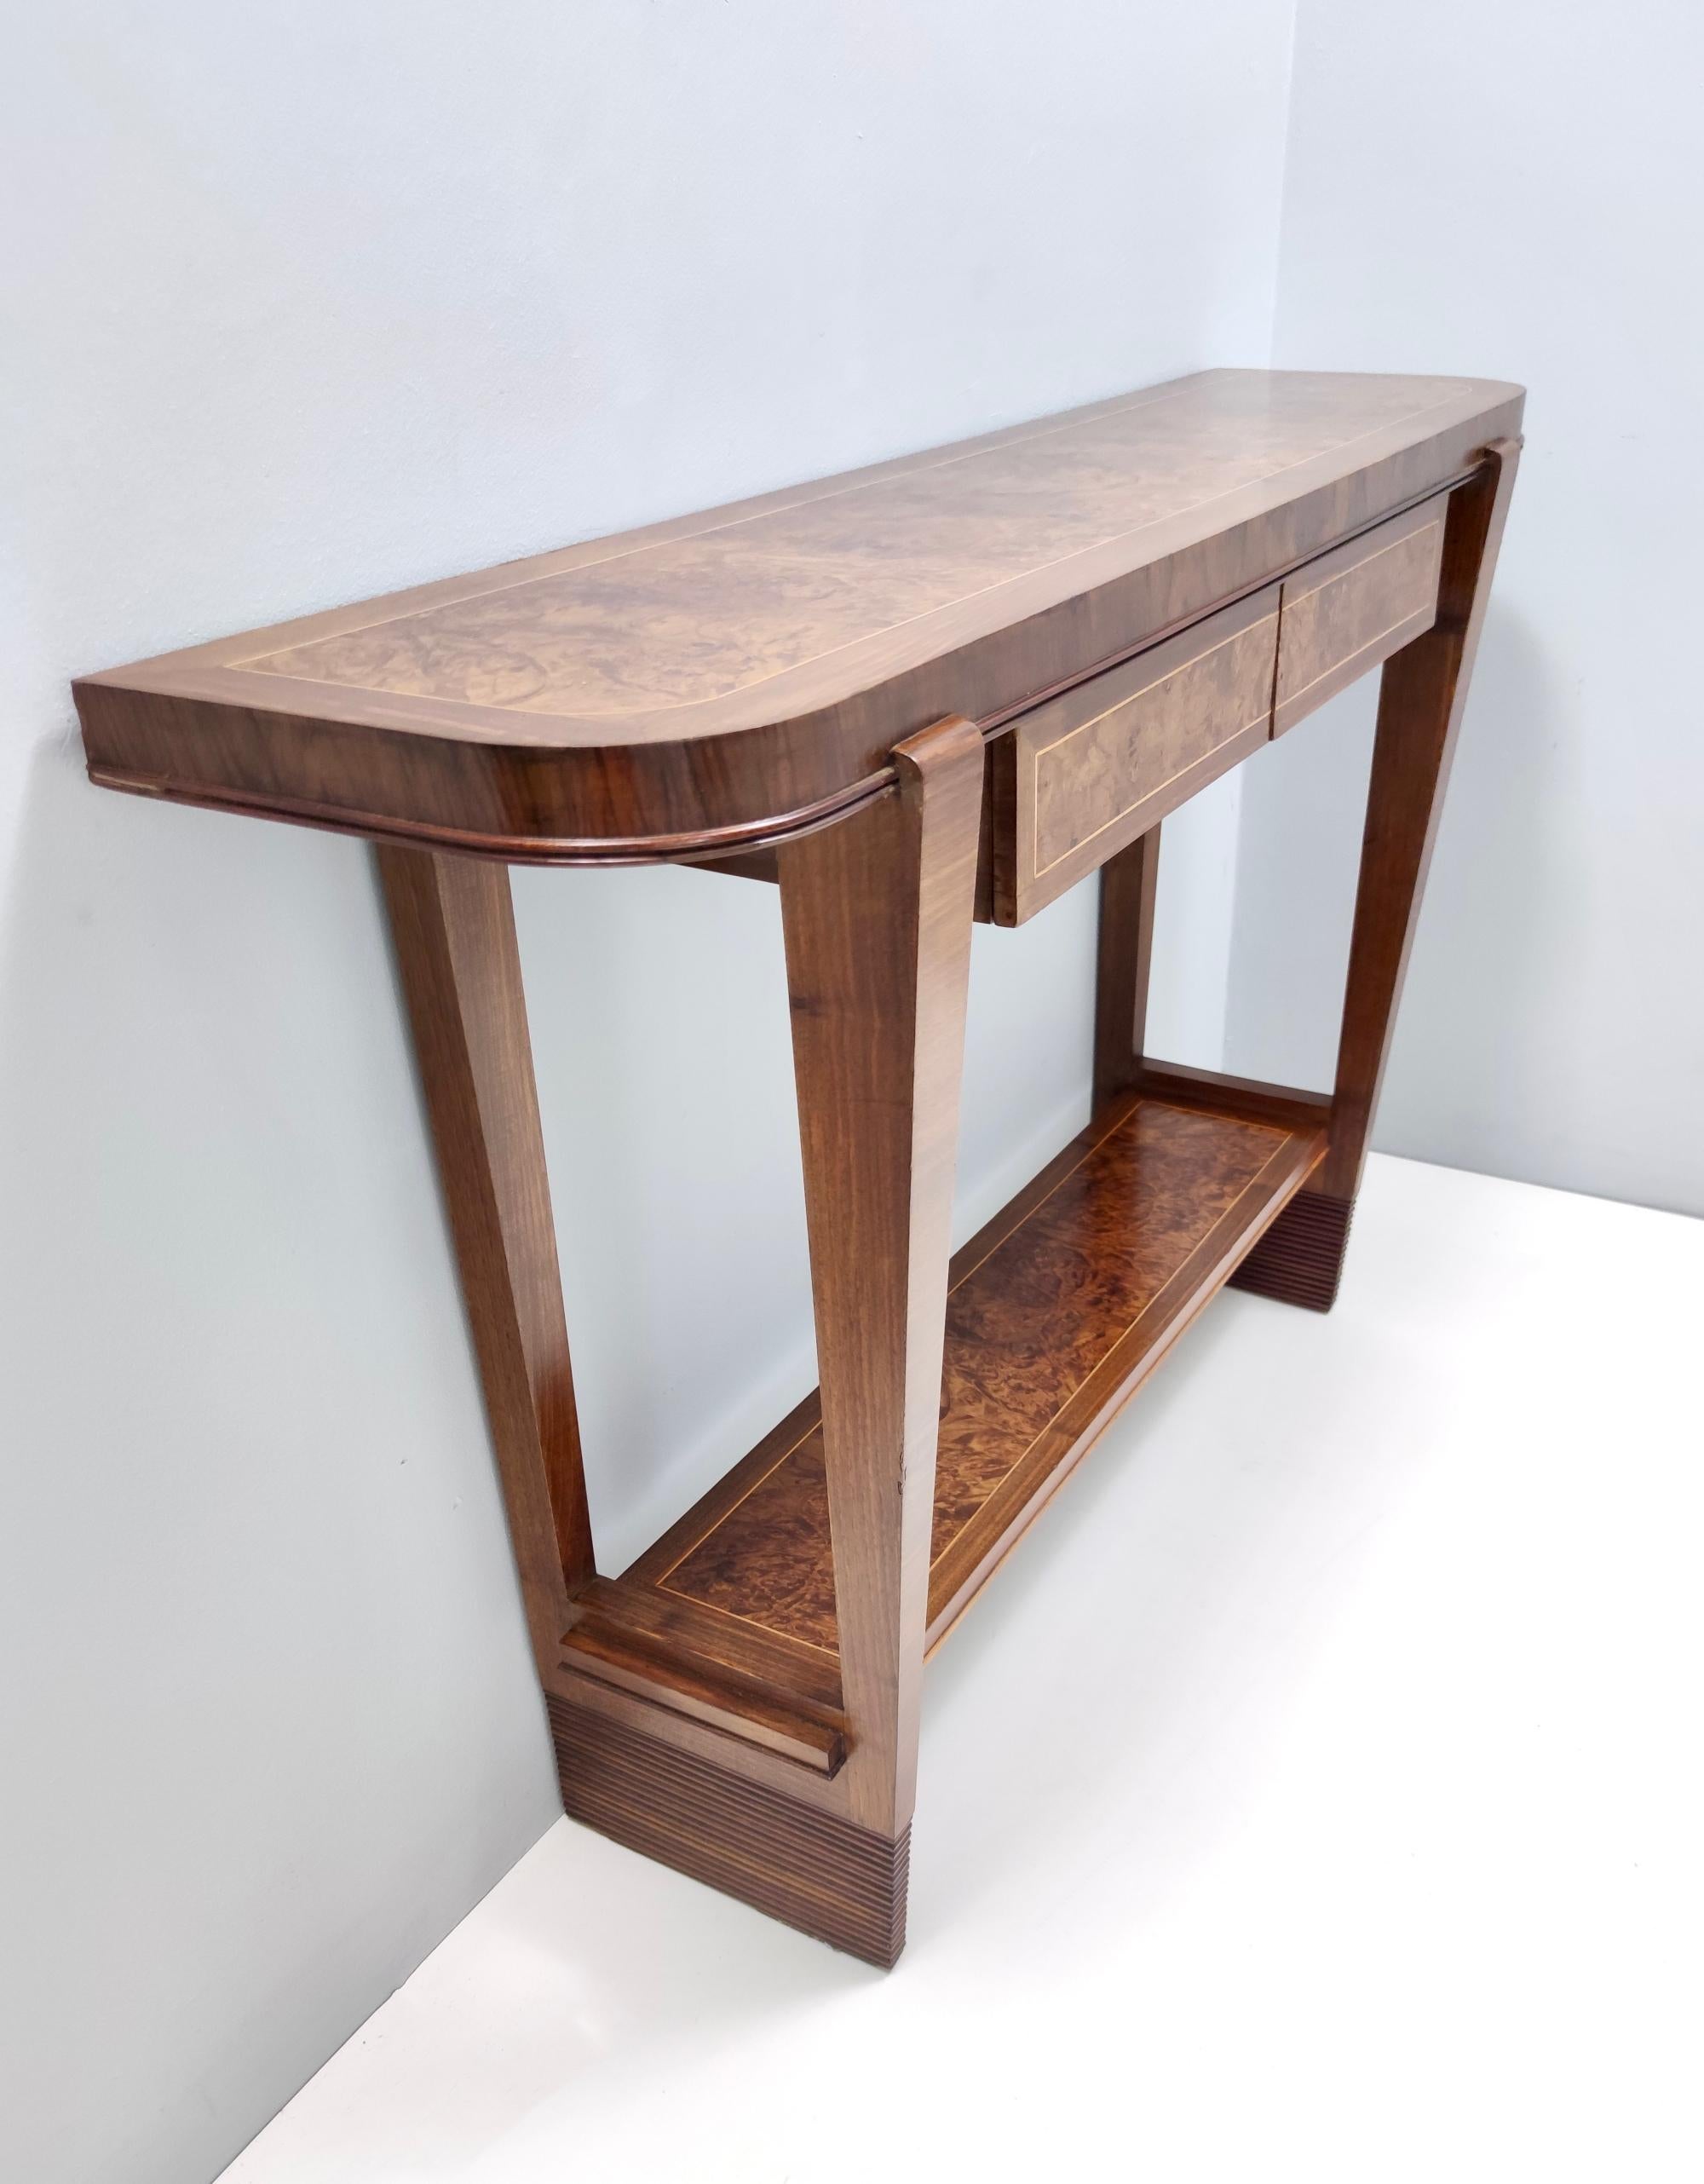 Mid-20th Century Vintage Walnut Console Table Ascribable to Paolo Buffa with Two Drawers, Italy For Sale